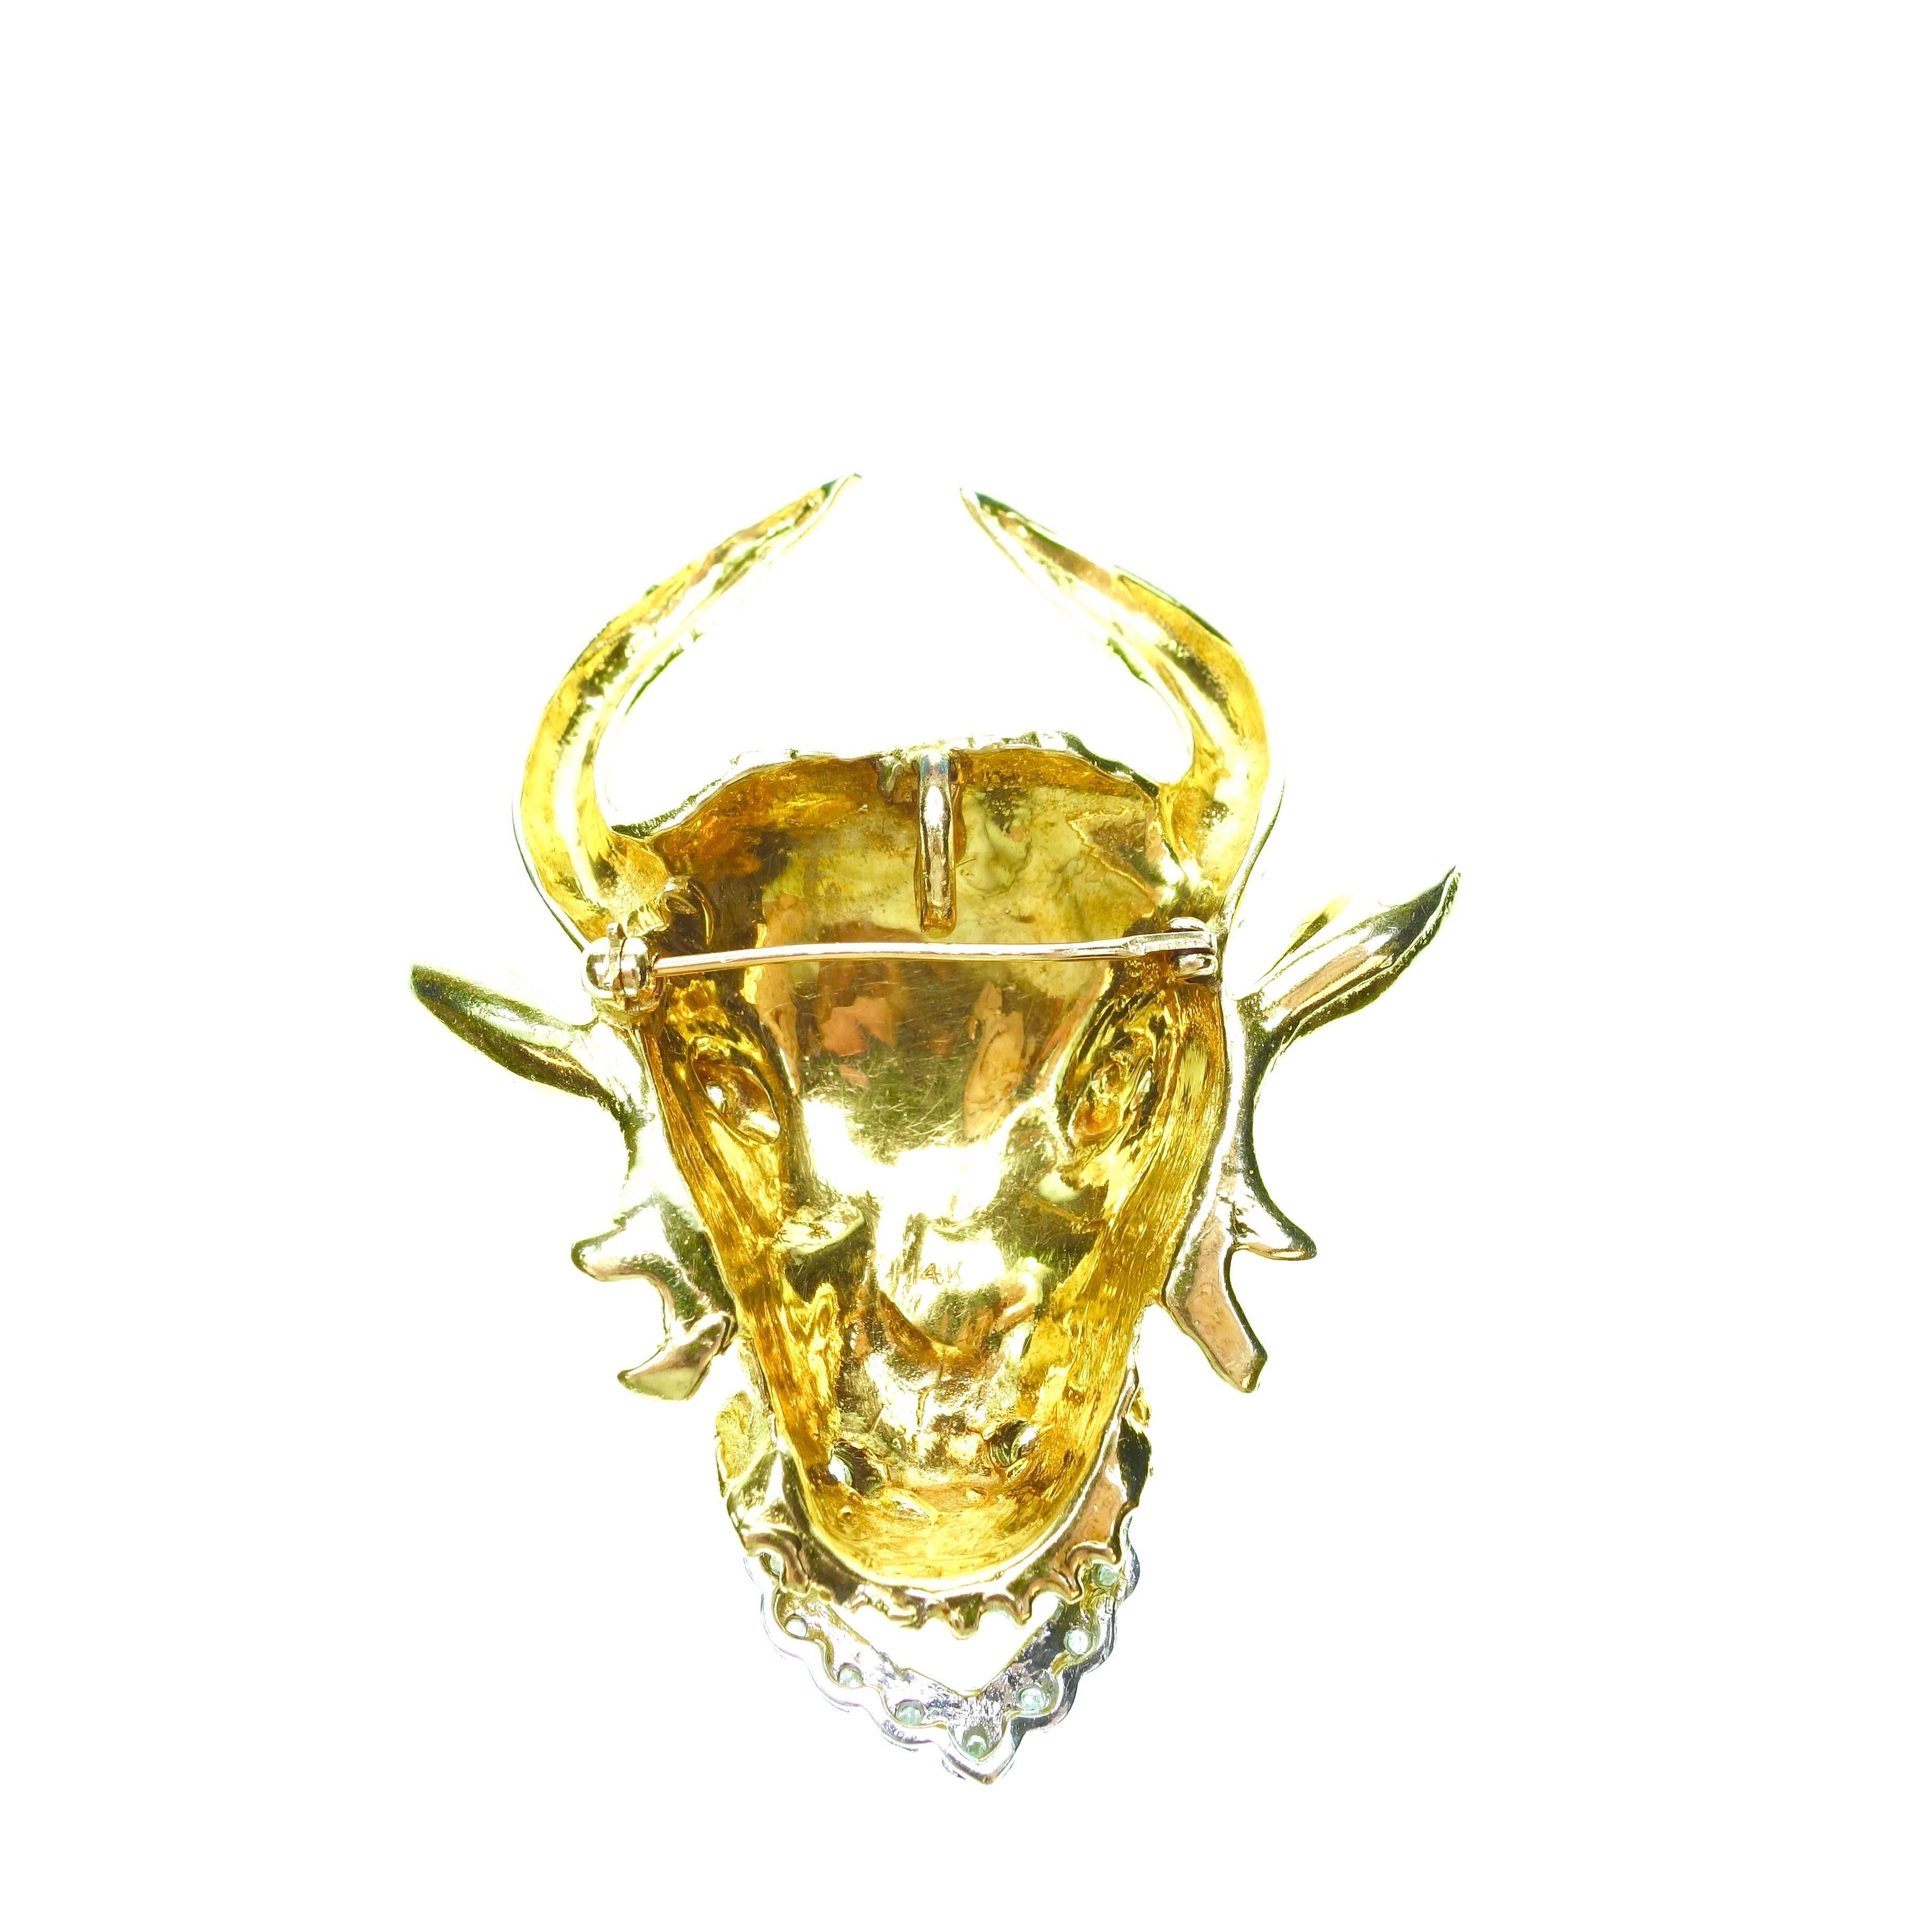 Custom made hand crafted 1960s 14K yellow and white gold large bull's head brooch/pendant with diamonds. 11 round brilliant cut diamonds, approximate total weight of 0.25ct.
Measurements: H 60mm x W 49mm x D 14mm
Weight: 38.2 grams